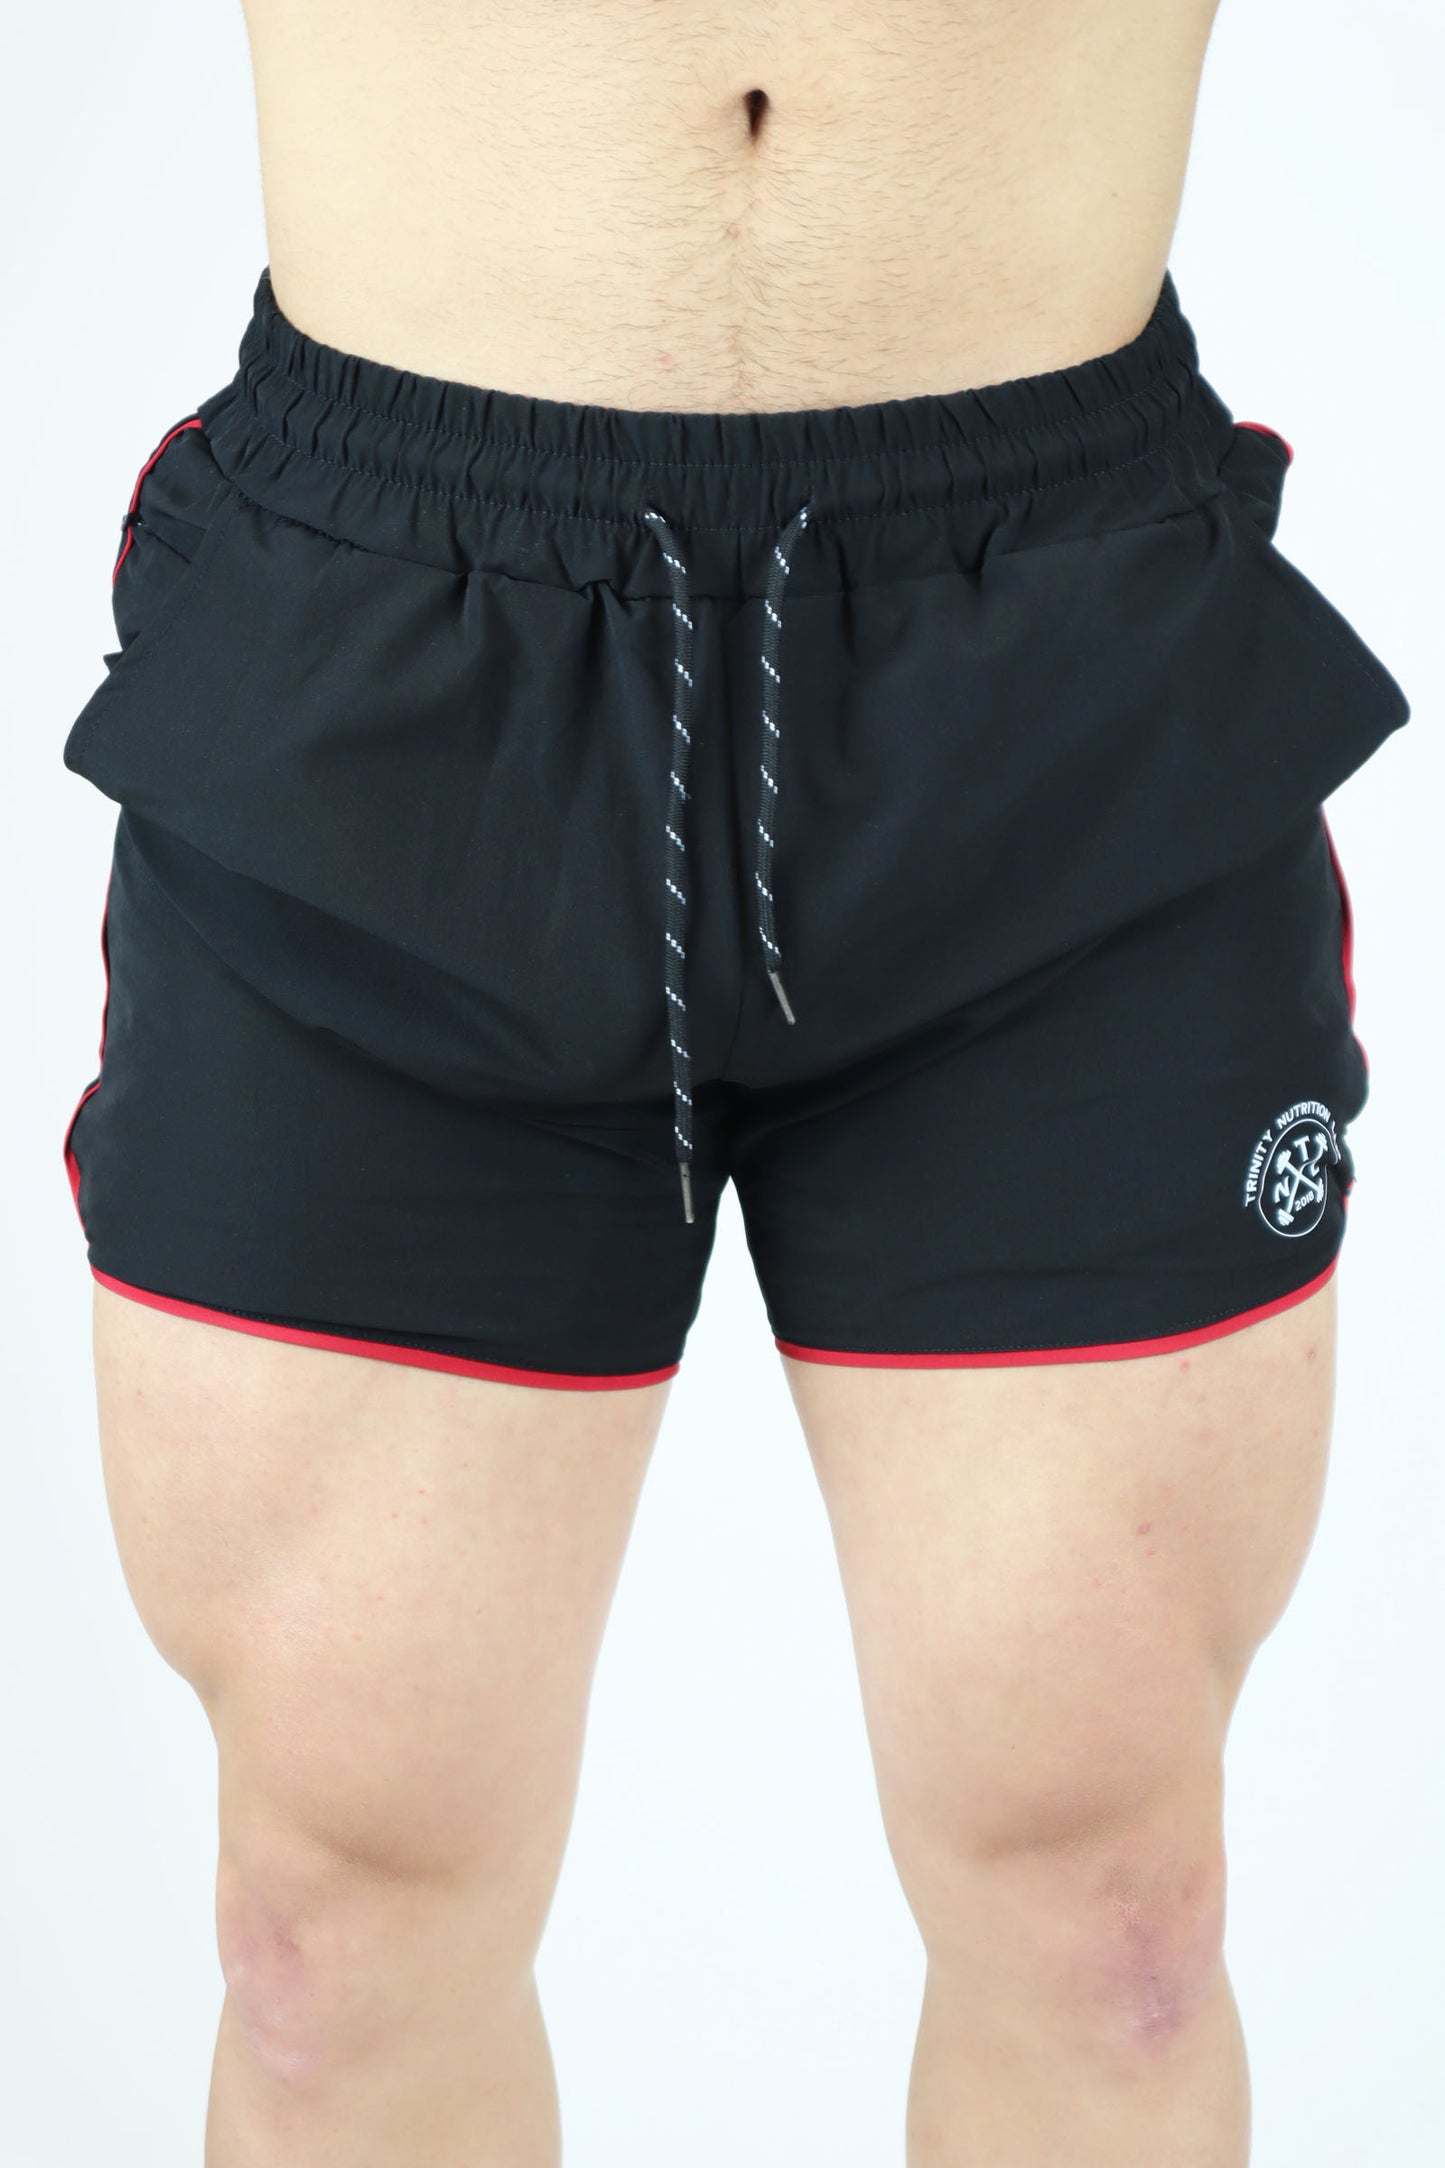 Best feeling most comfortable gym shorts for leg day